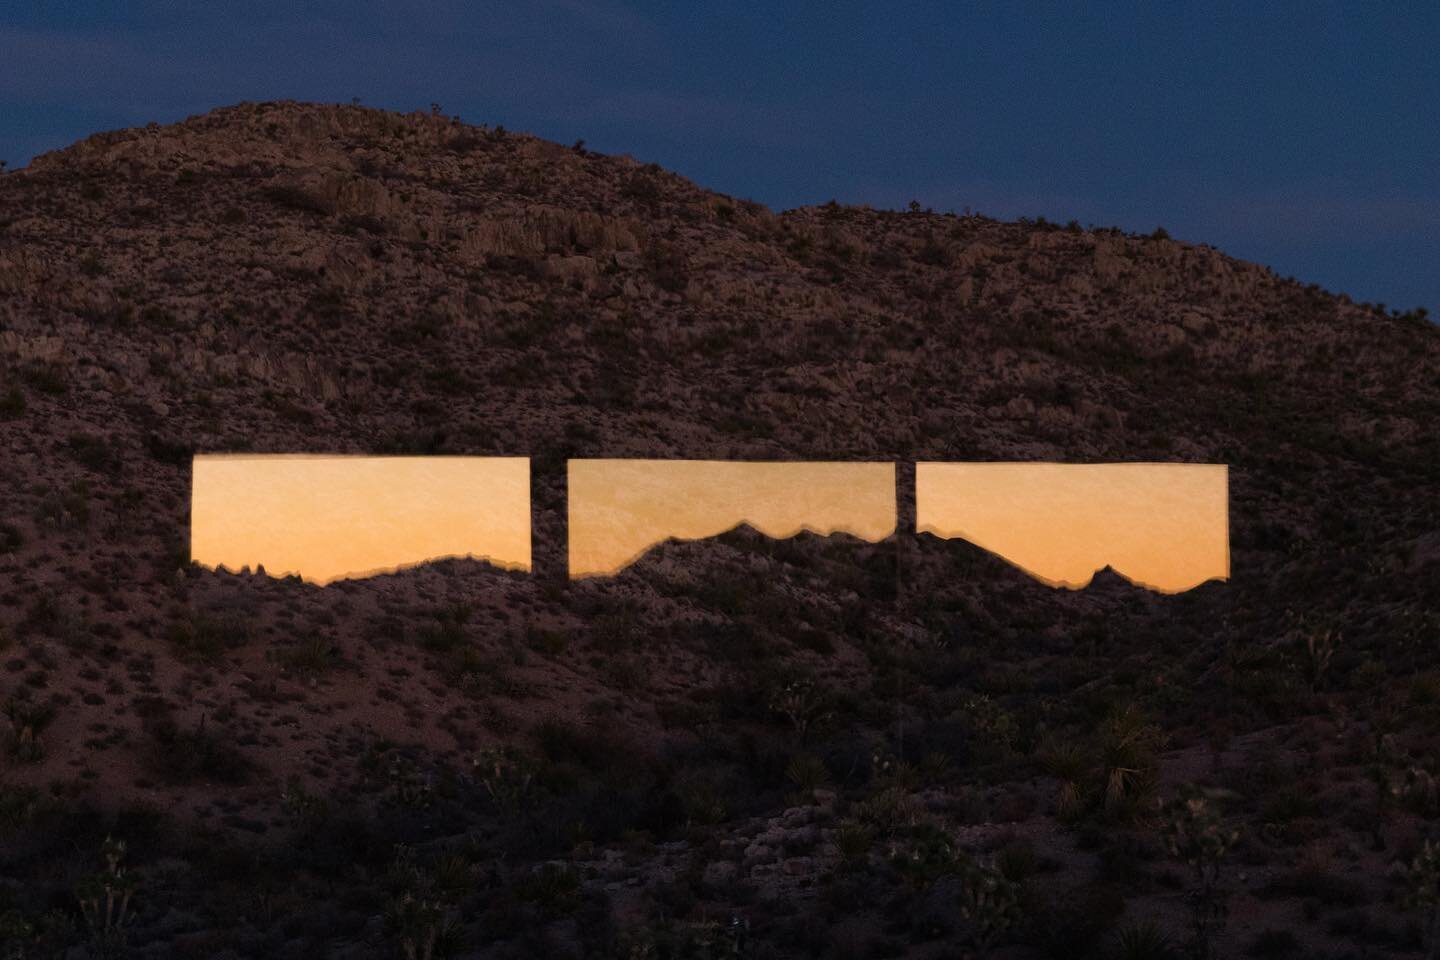 still finding balance after a wild few months. thankful to all those who have helped along the way and to the desert that always welcomes me home.
.
.
.
.
.
#incamera #nevada #dusk